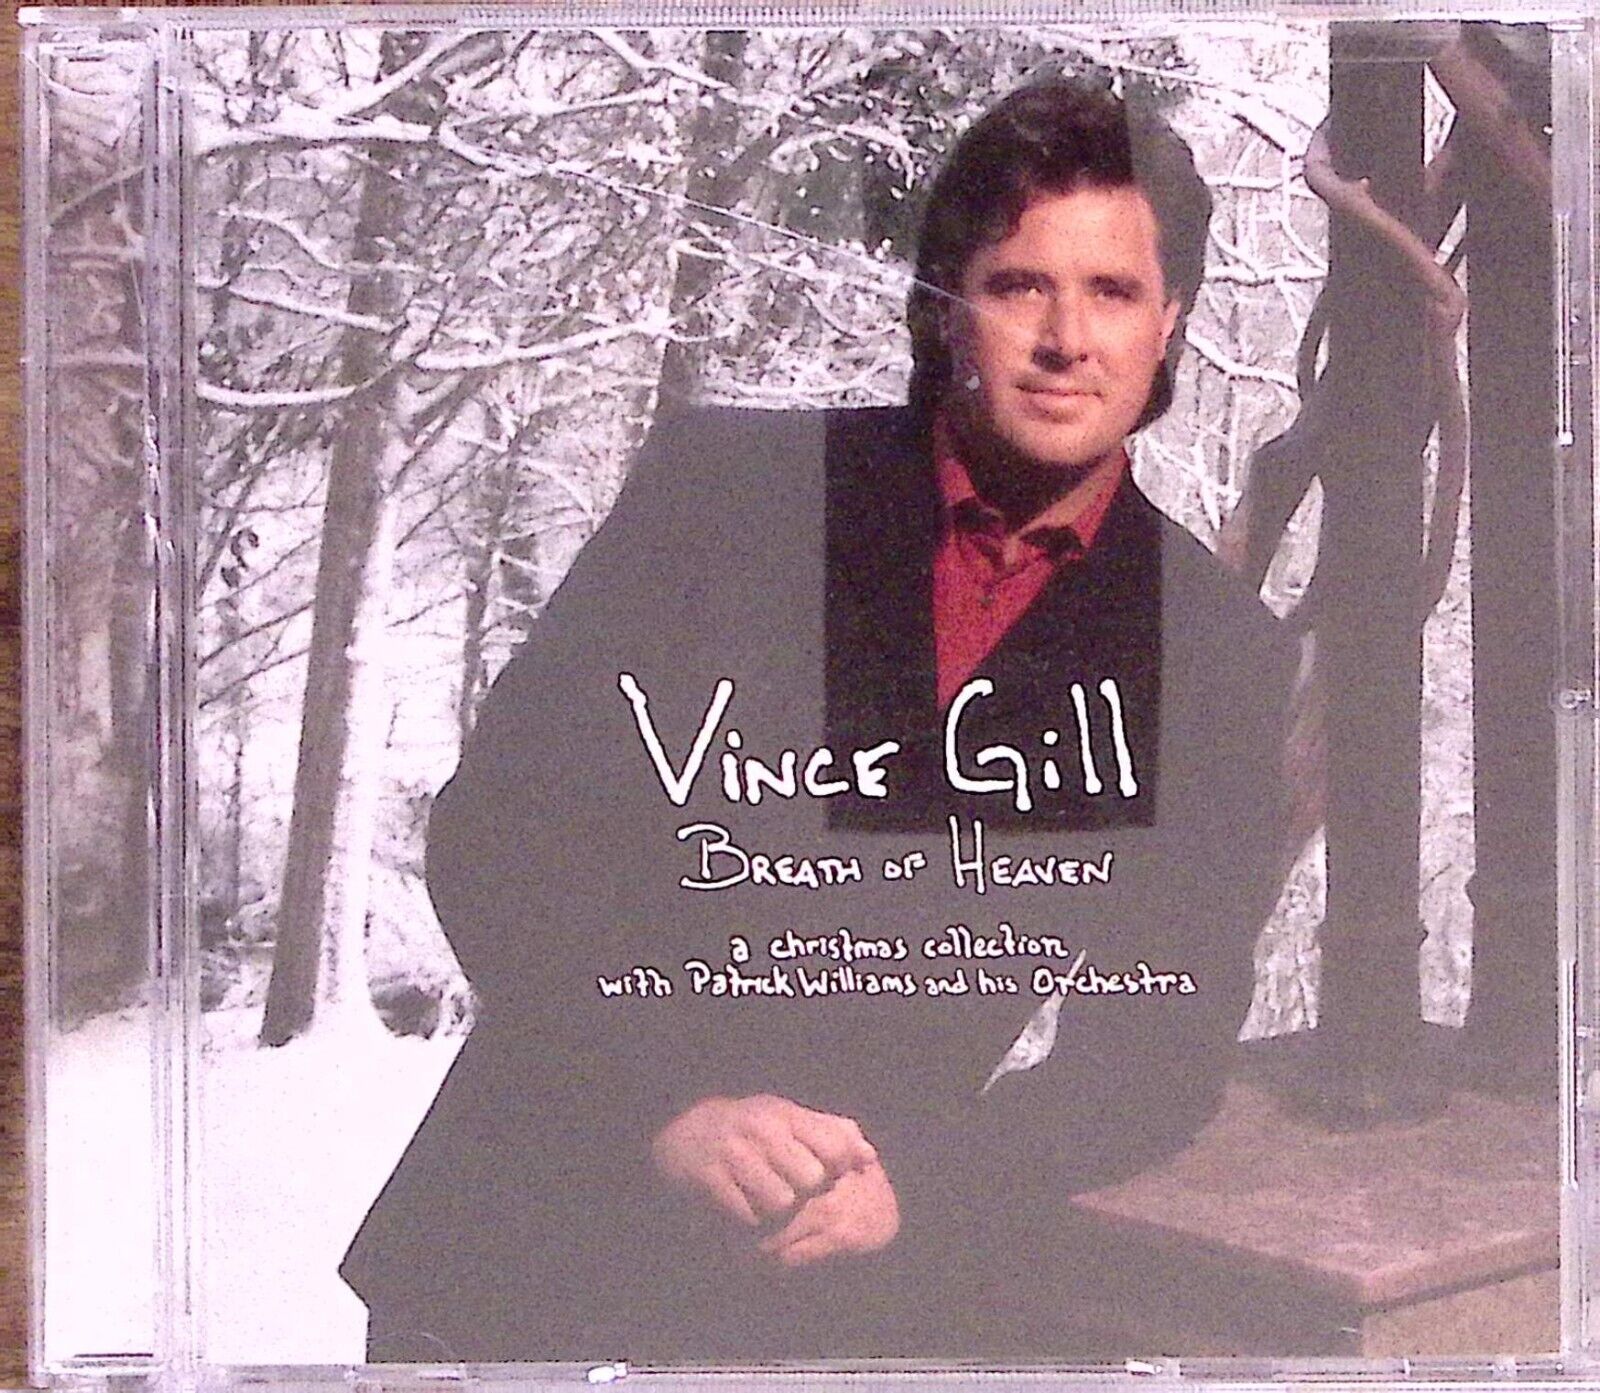 VINCE GILL  BREATH OF HEAVEN A CHRISTMAS COLLECTION  PATRICK WILLIAMS MCA CD2690